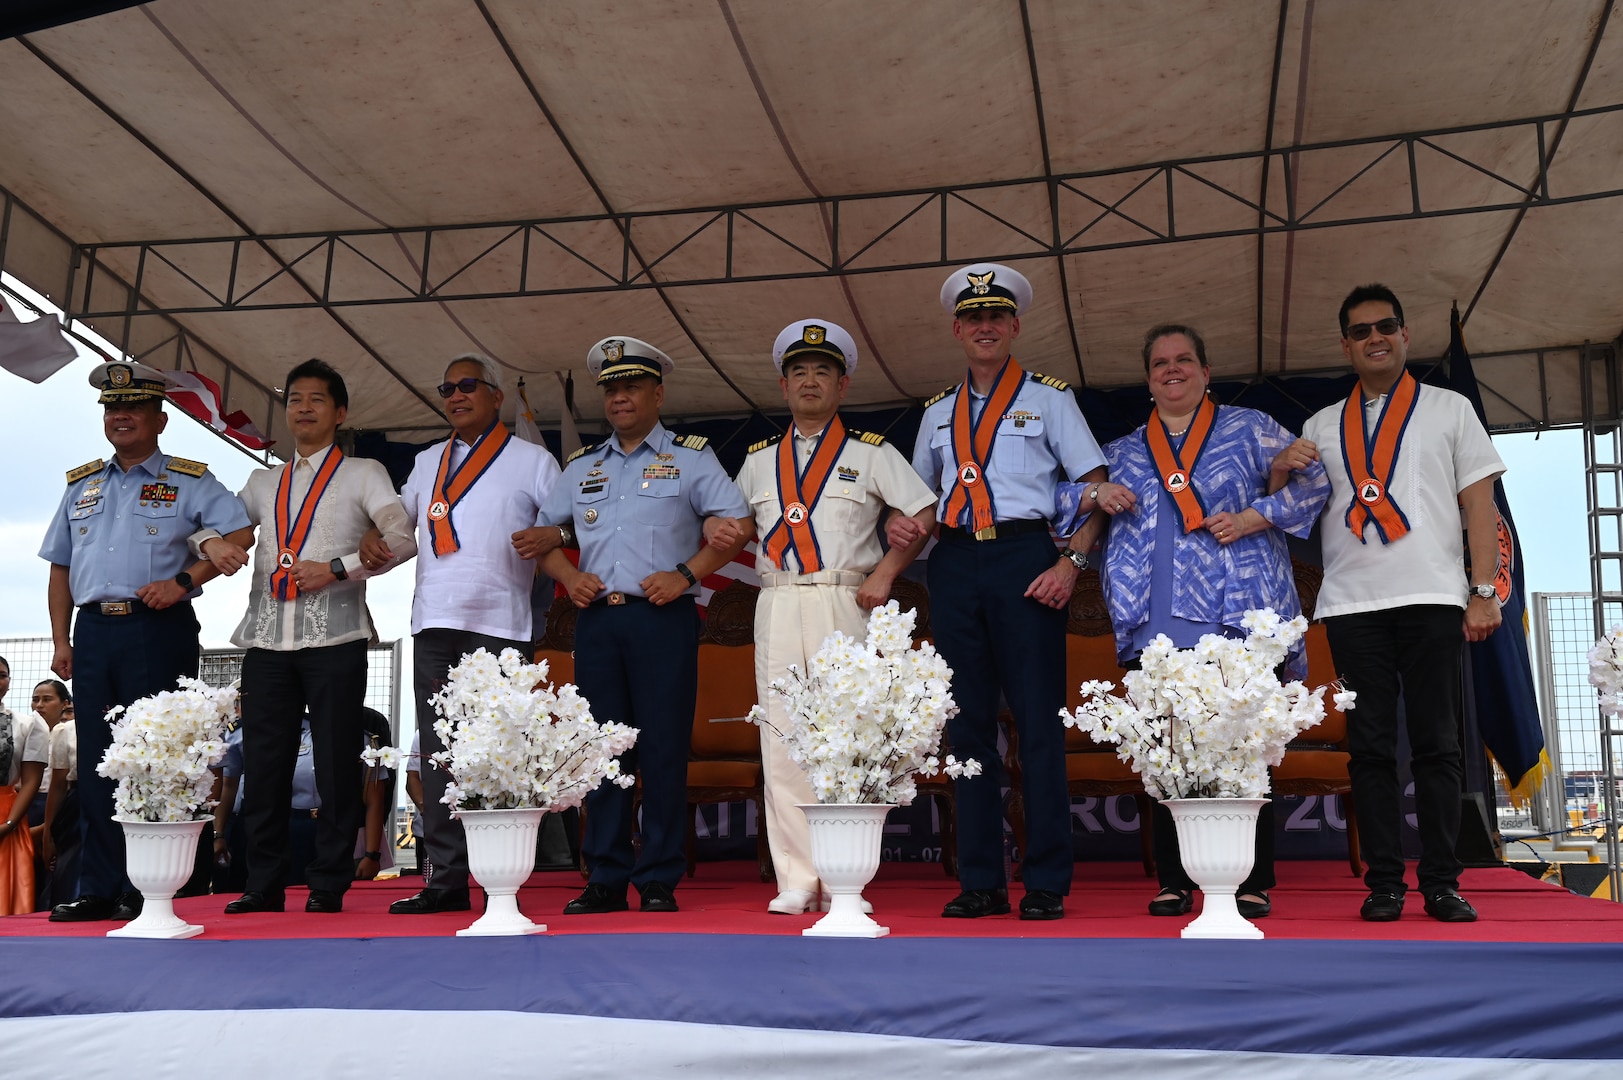 Members from the Philippine Coast Guard, Japan Coast Guard, U.S. Coast Guard and government officials from each country stand-arm and-arm with each other following the arrival of the U.S. Coast Guard Cutter Stratton (WMSL 752) and the Japan Coast Guard Vessel Akitsushima (PLH 32) to Manila, Philippines, for a tri-lateral engagement between the three coast guards, June 1, 2023. Stratton deployed to the Western Pacific under U.S. Navy 7th Fleet command to serve as a non-escalatory asset for the promotion of a rules-based order in the maritime domain by engaging with partner nations and allies in the region. (U.S. Coast Guard photo by Chief Petty Officer Matt Masaschi)